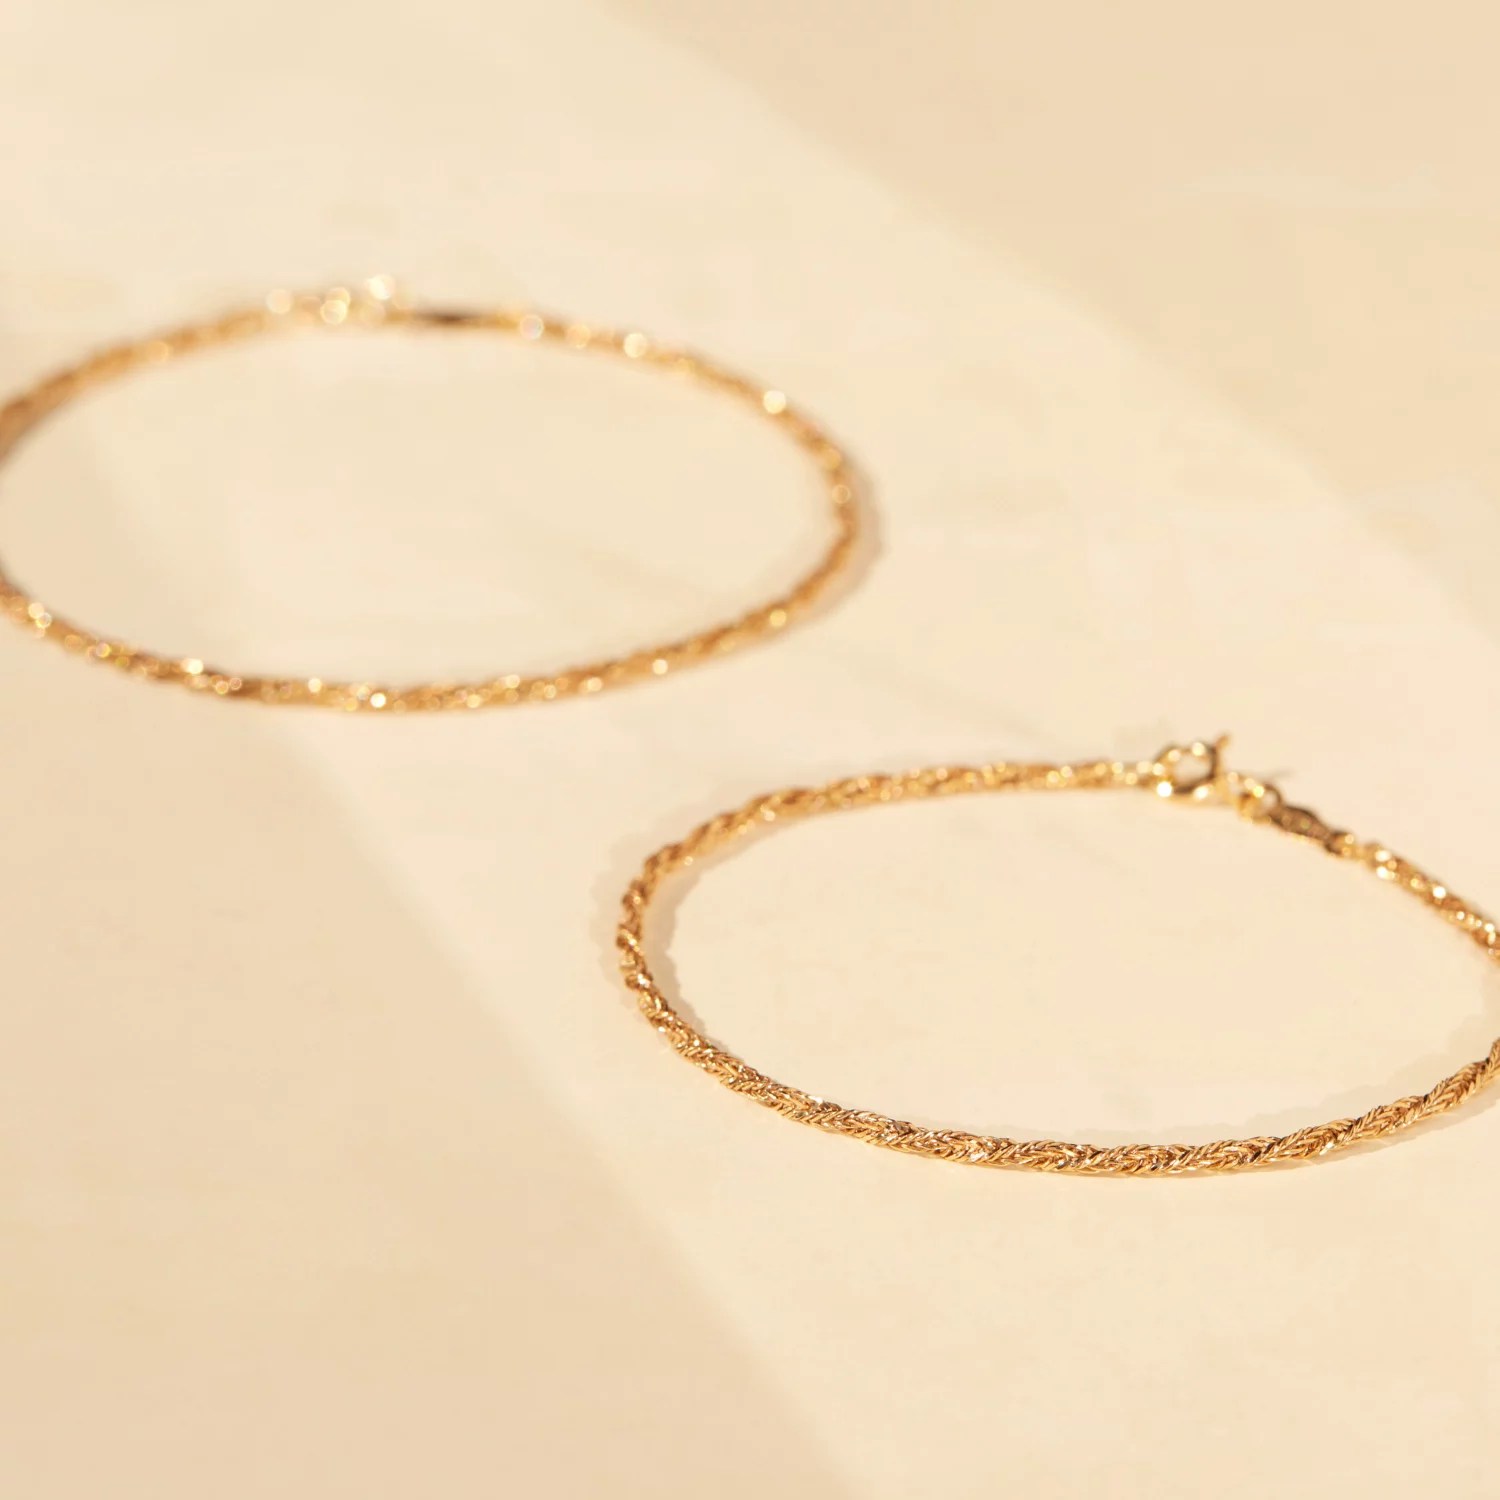 catbird lover's bracelet, one of the best valentine's day gifts for couples